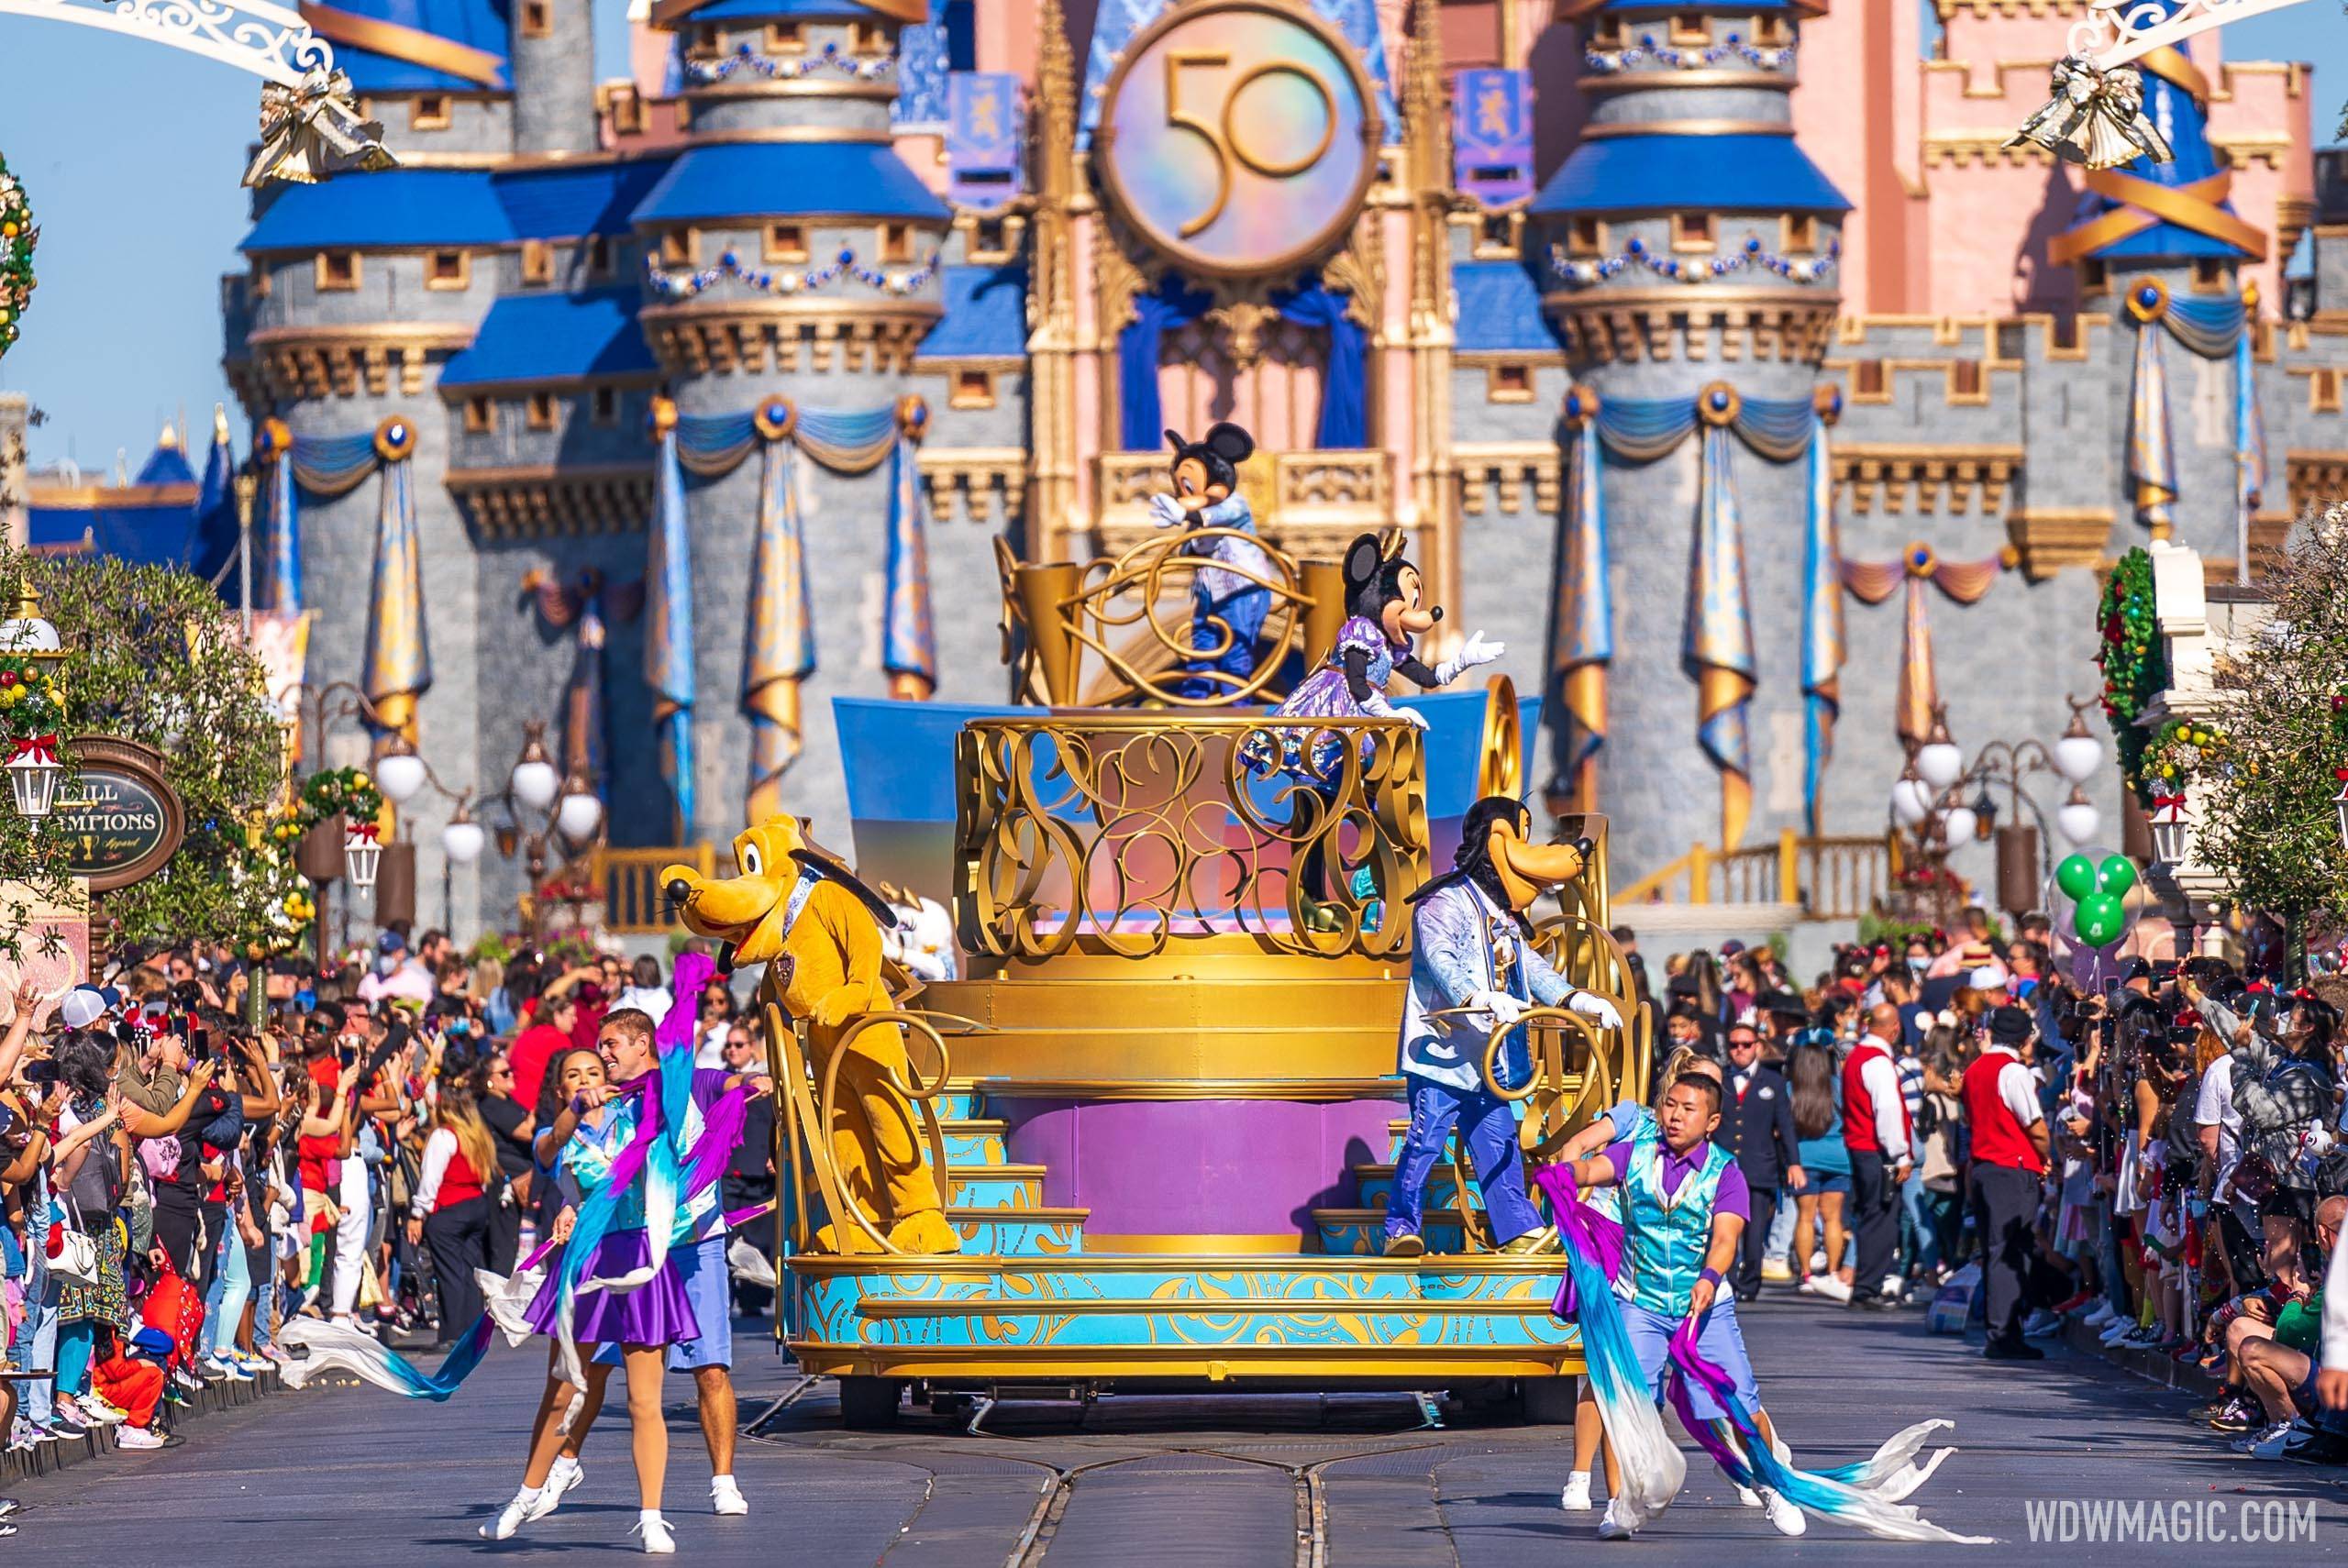 How To Make Reservations For Disney World In 2023